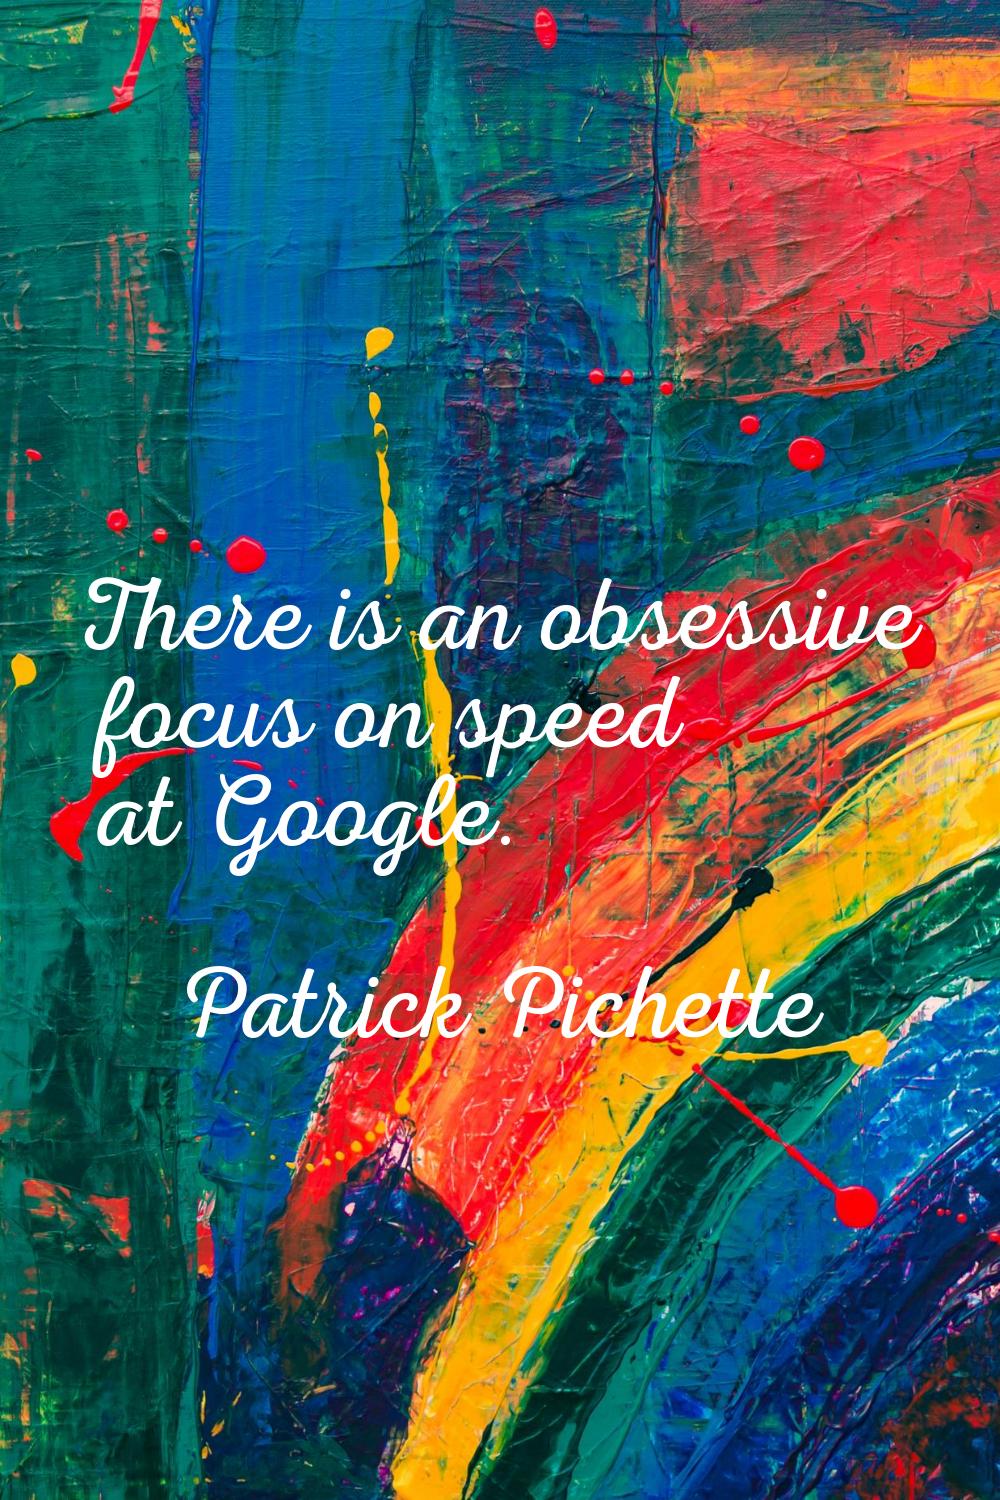 There is an obsessive focus on speed at Google.